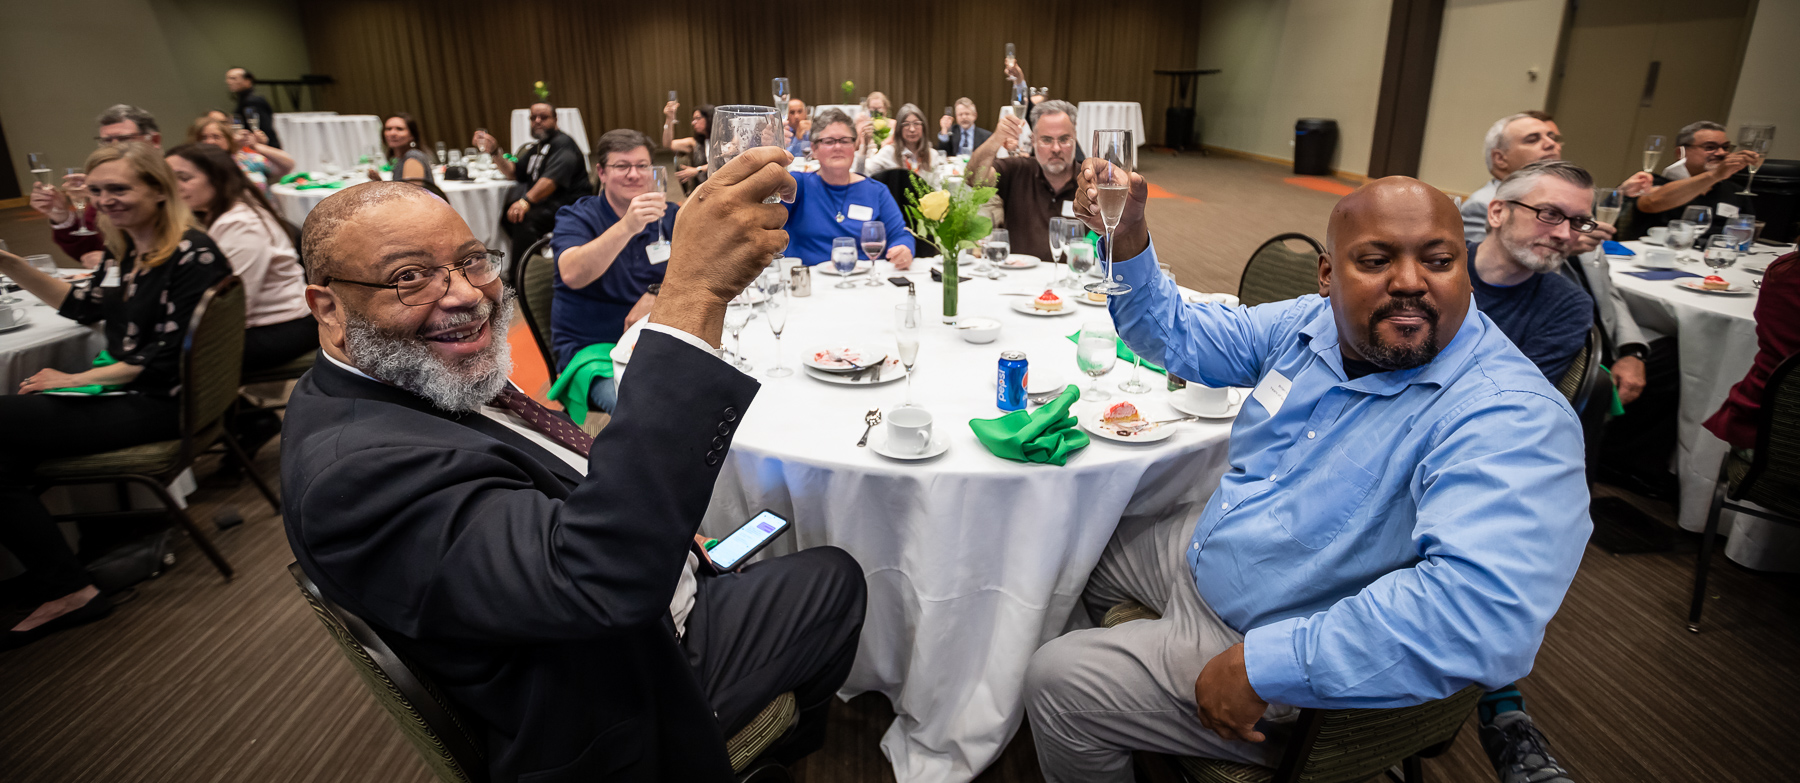 Attendees raise their glasses for a toast during the first in-person Distinguished Service Awards luncheon since 2019.